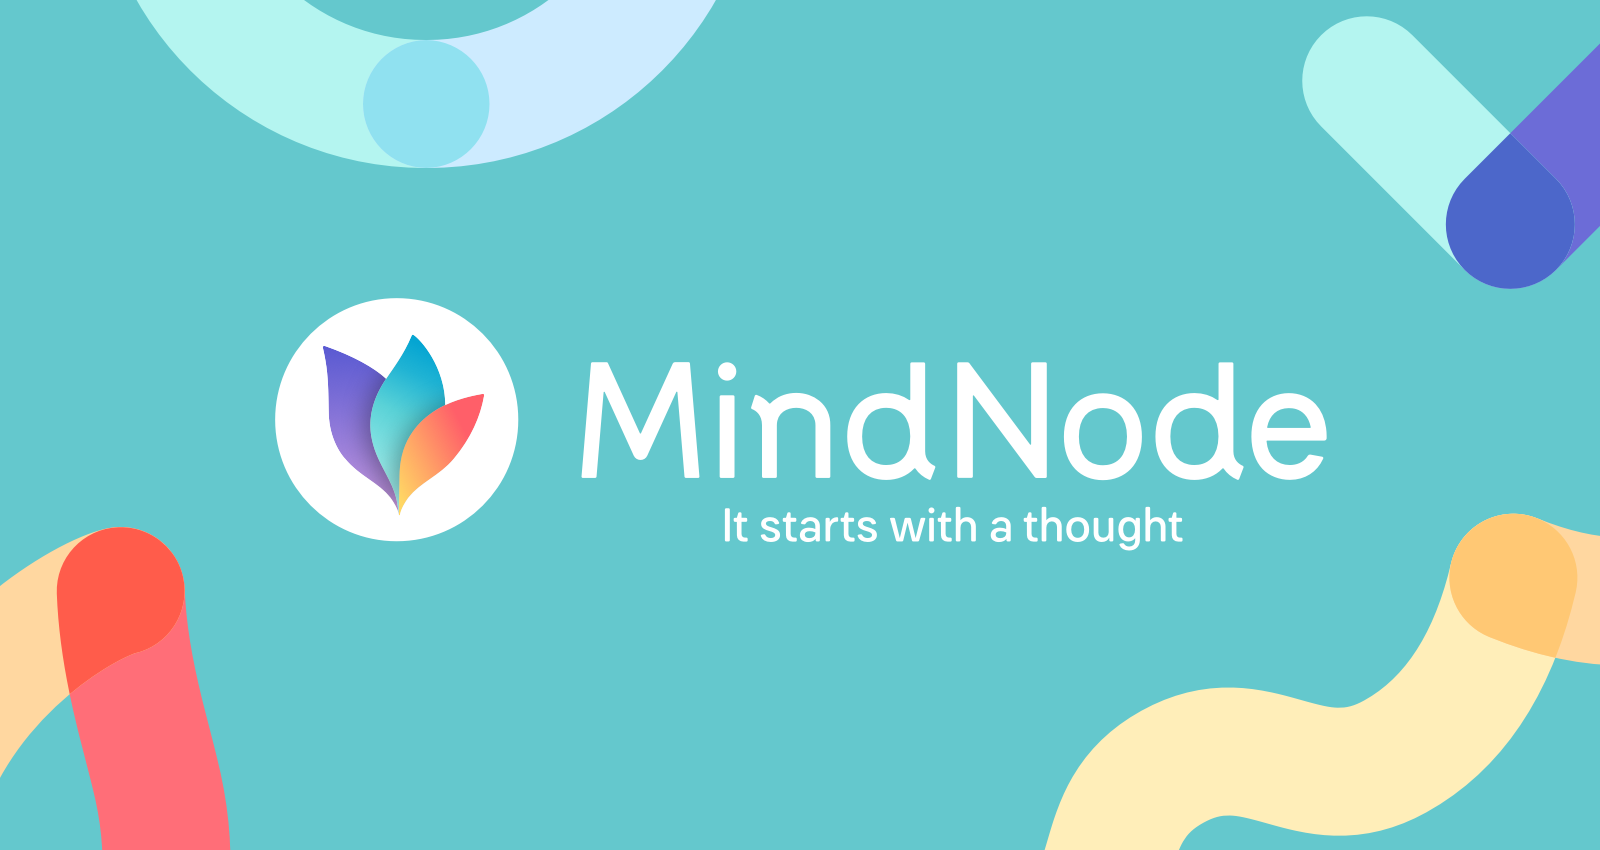 MindNode: What's on your mind?